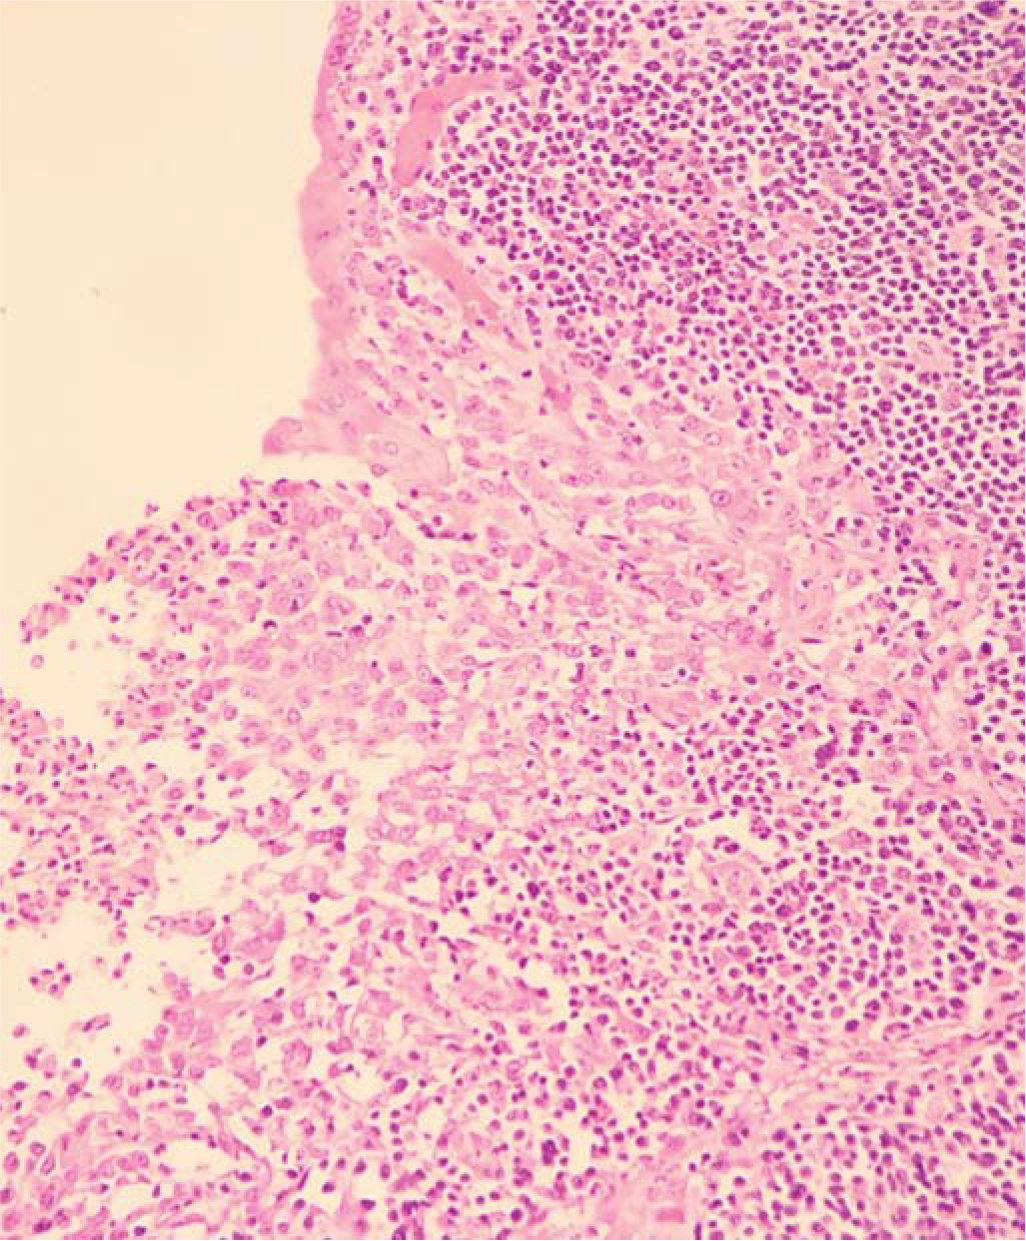 Macrophages lining the mucosal aspect of the appendix